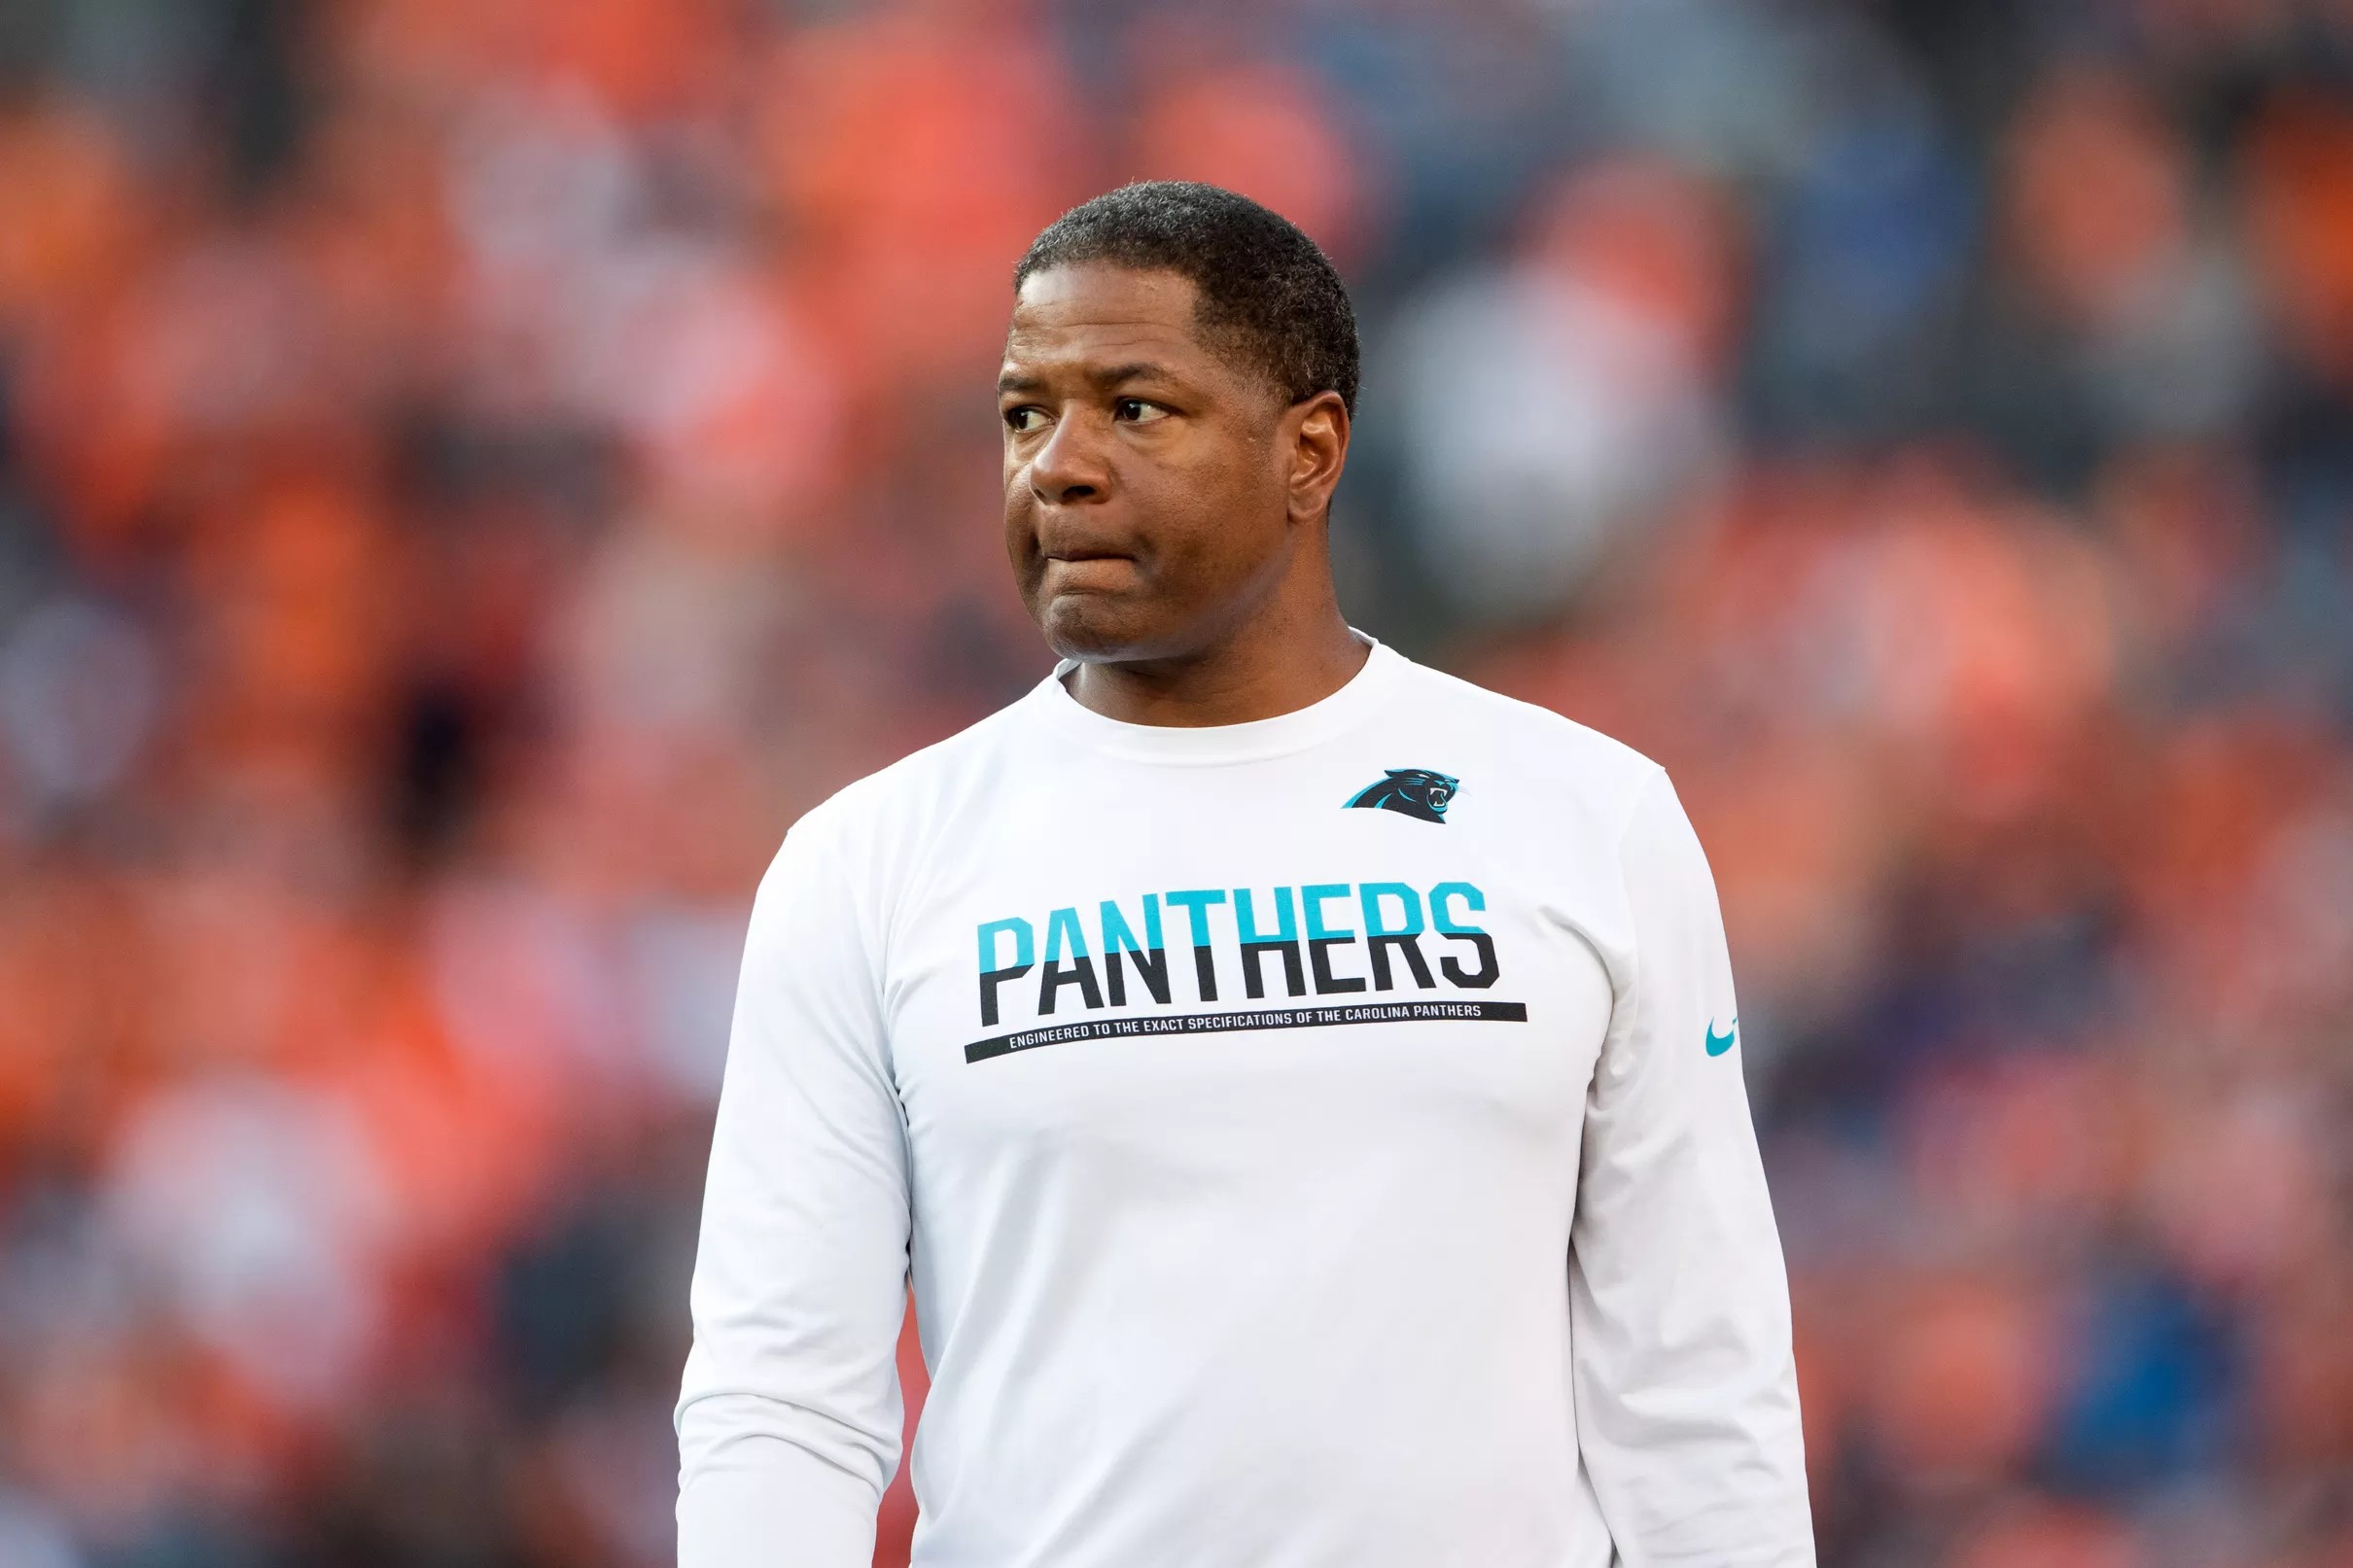 Panthers defensive coordinator Steve Wilks may be in line for the New